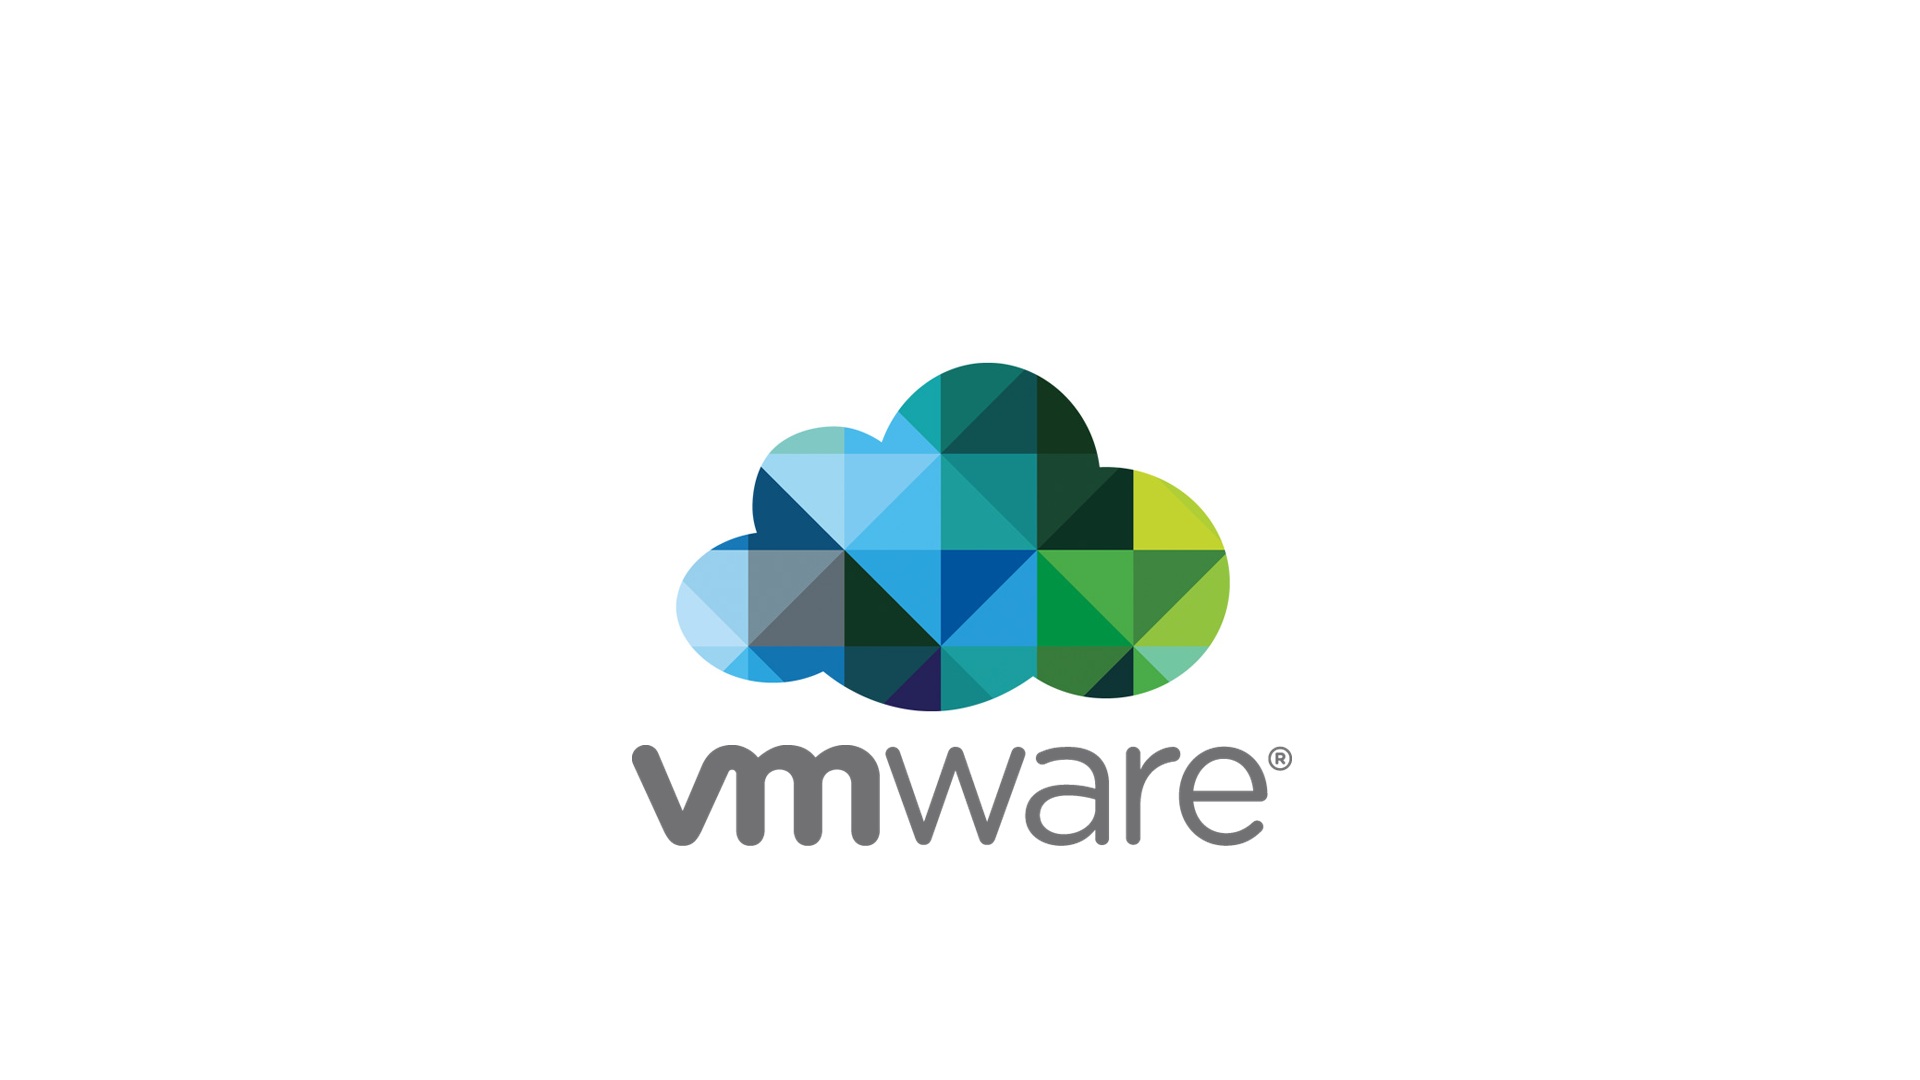 VMware vRealize Automation: Install, Configure, Manage [V8]